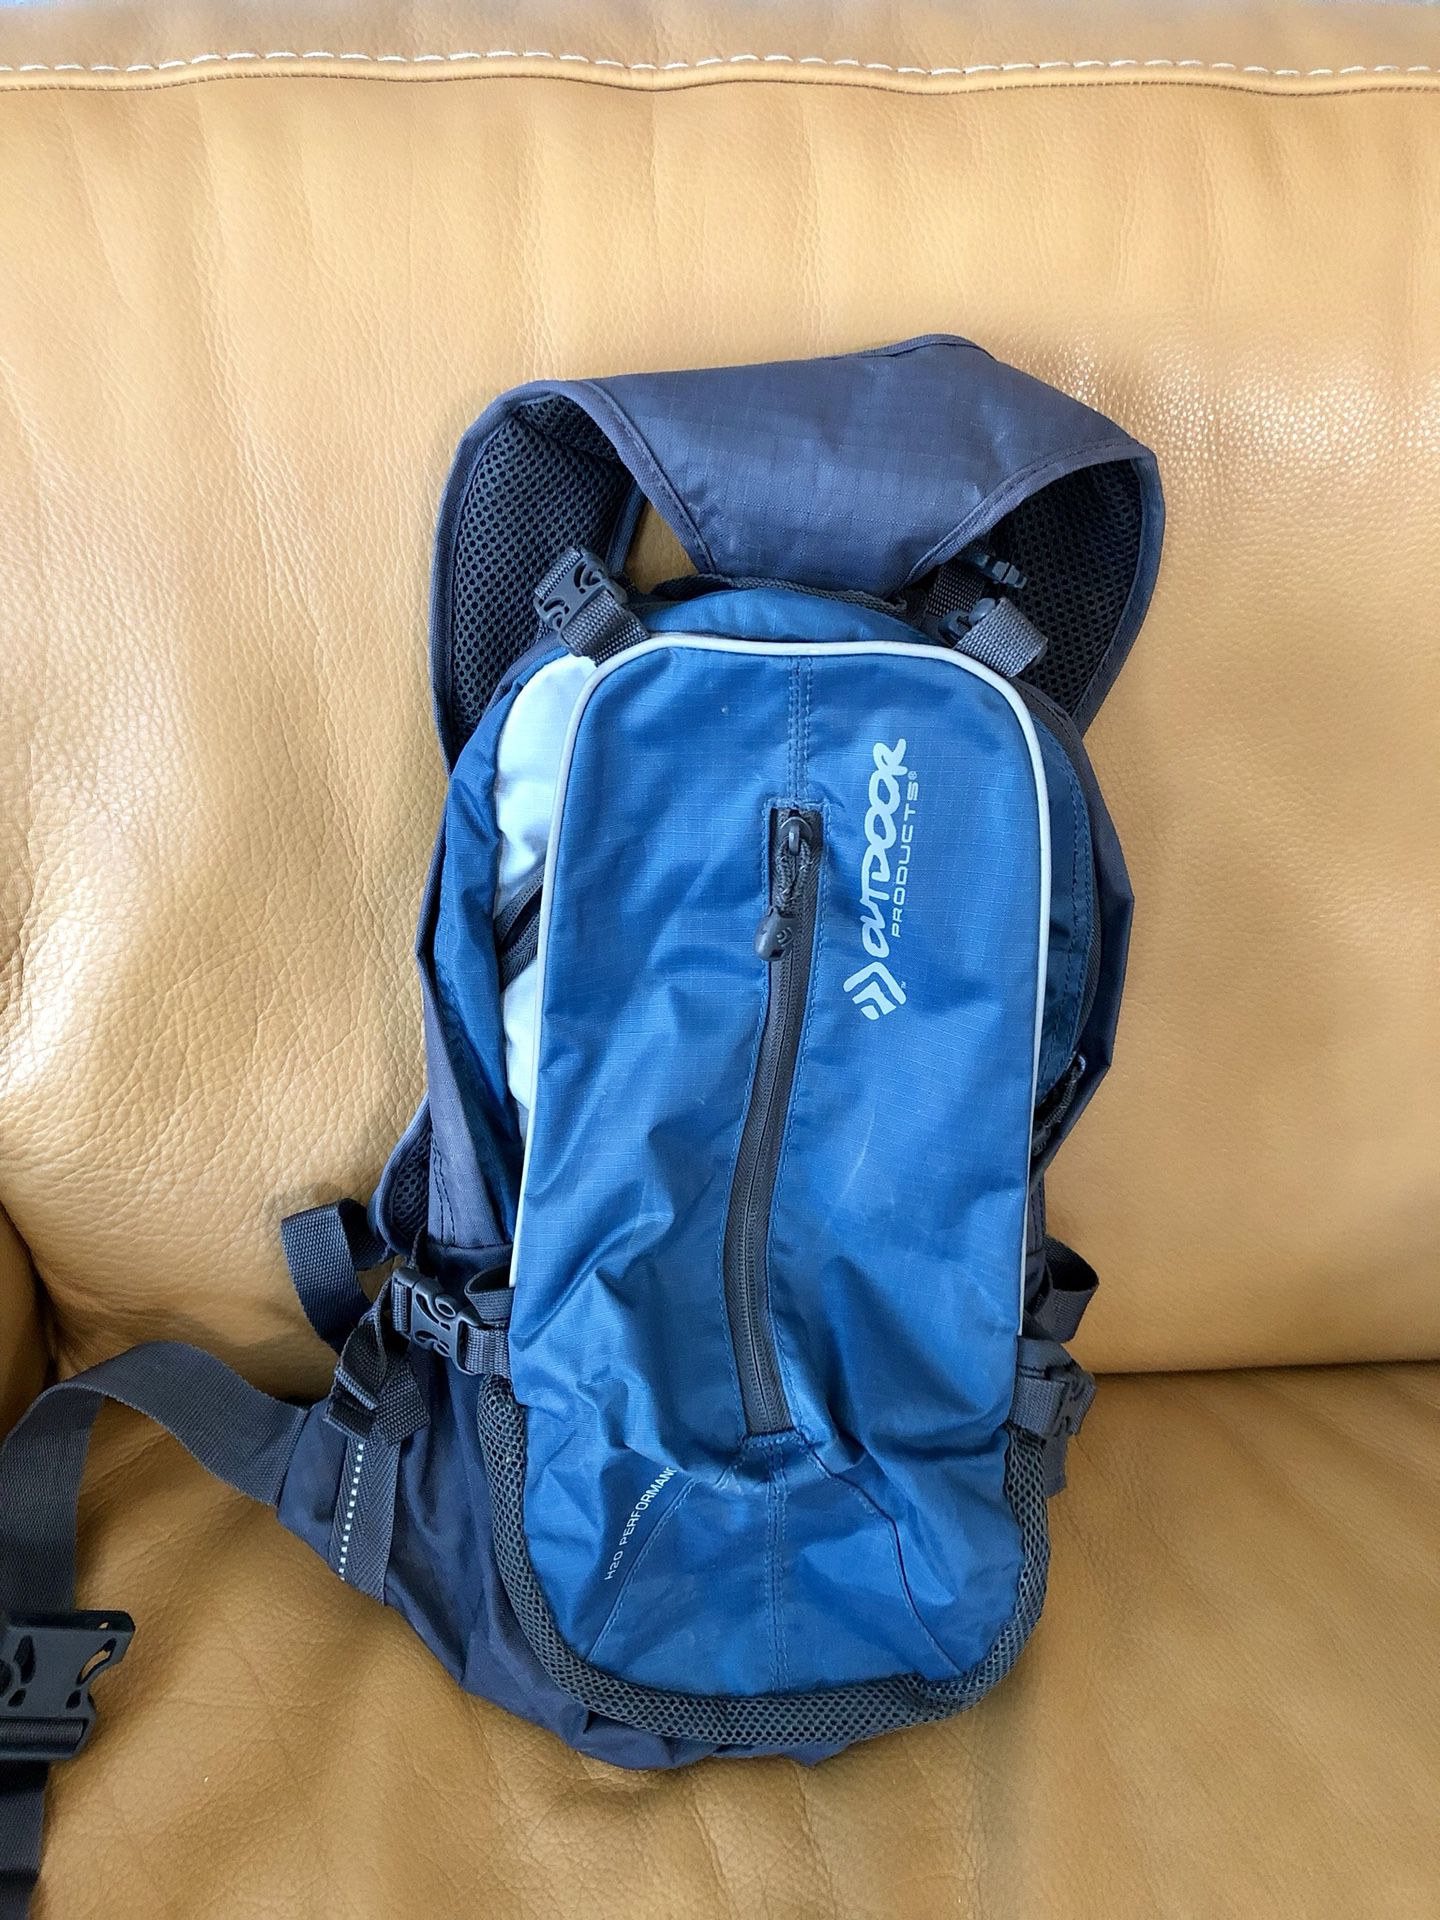 Outdoor Camelback Water Hydration Pack